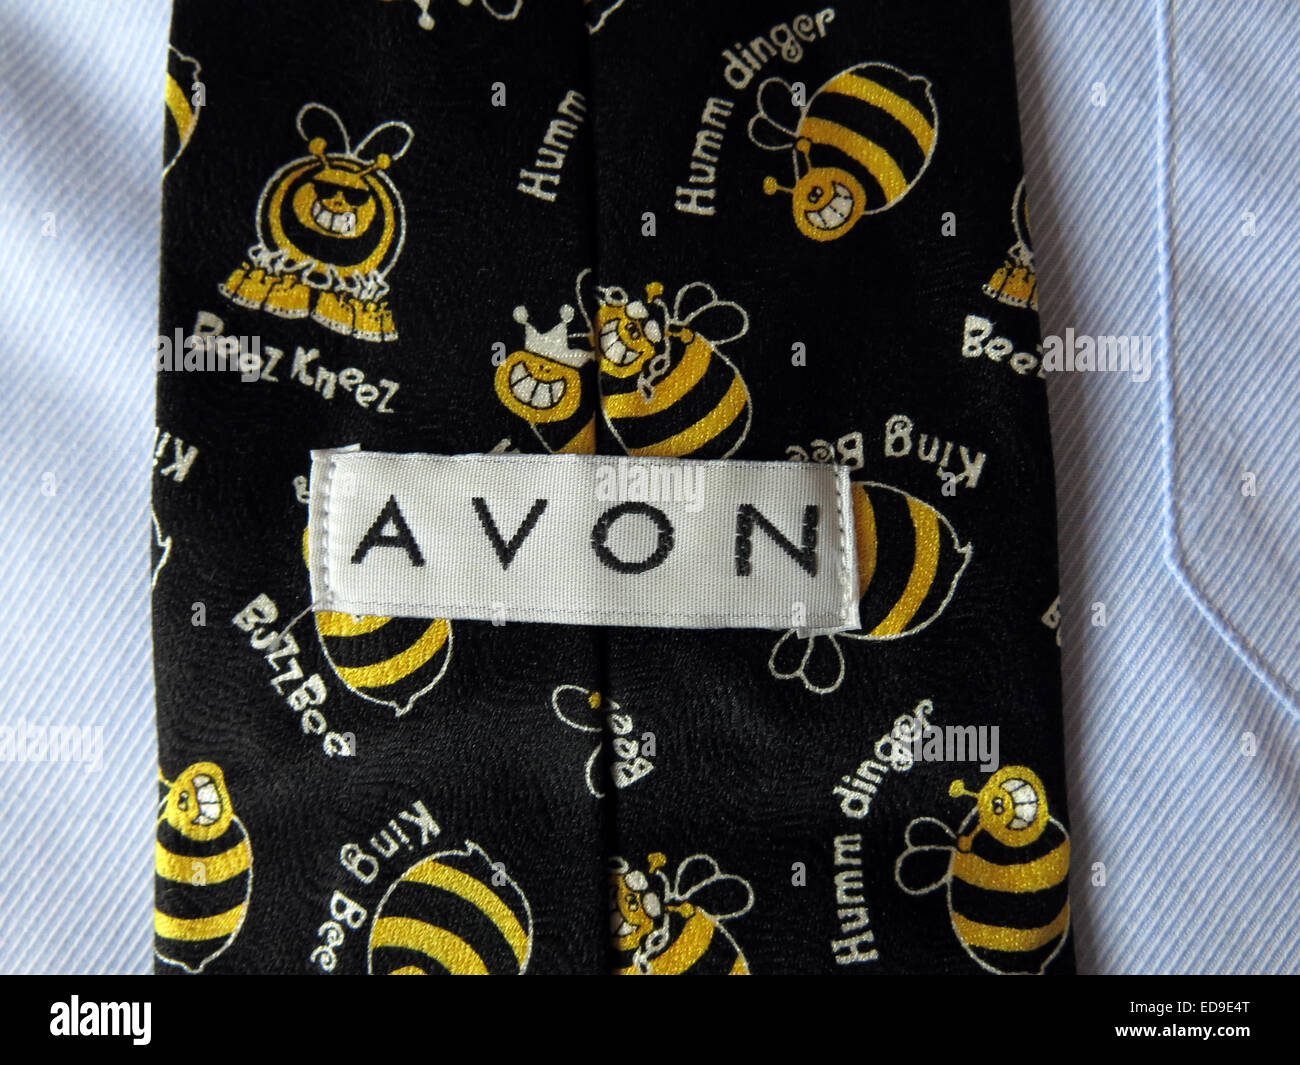 Interesting vintage Avon tie with busy bees, male neckware in silk Stock Photo